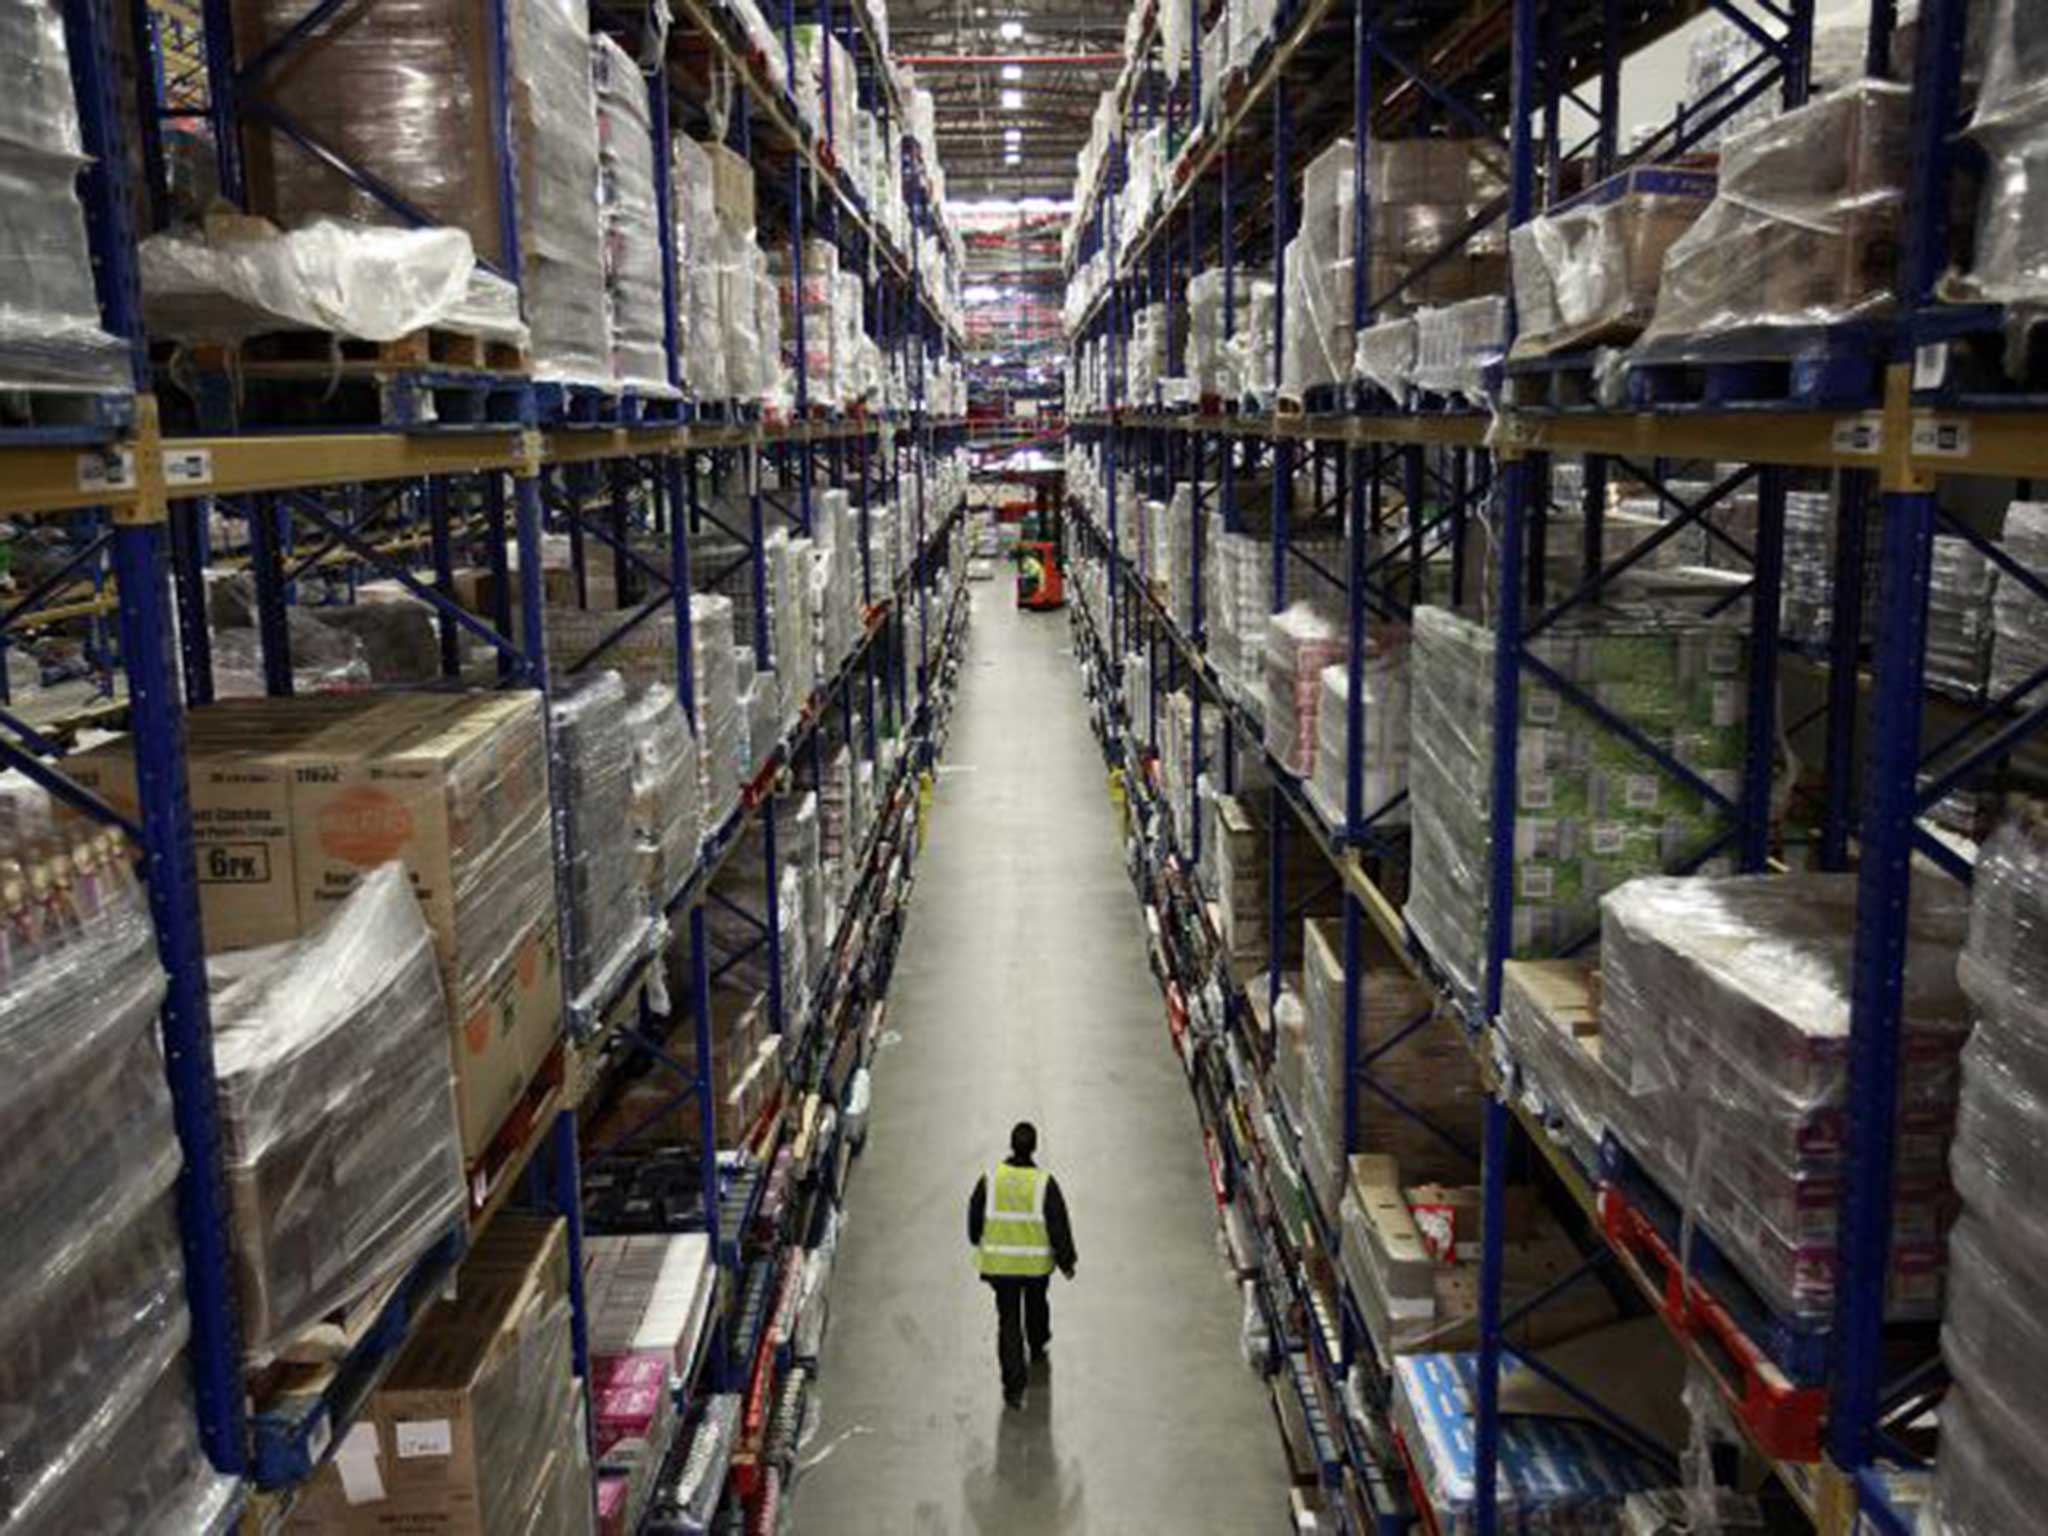 Ocado's distribution centre in Hatfield, Hertfordshire. Will its mystery customer buy this kit?